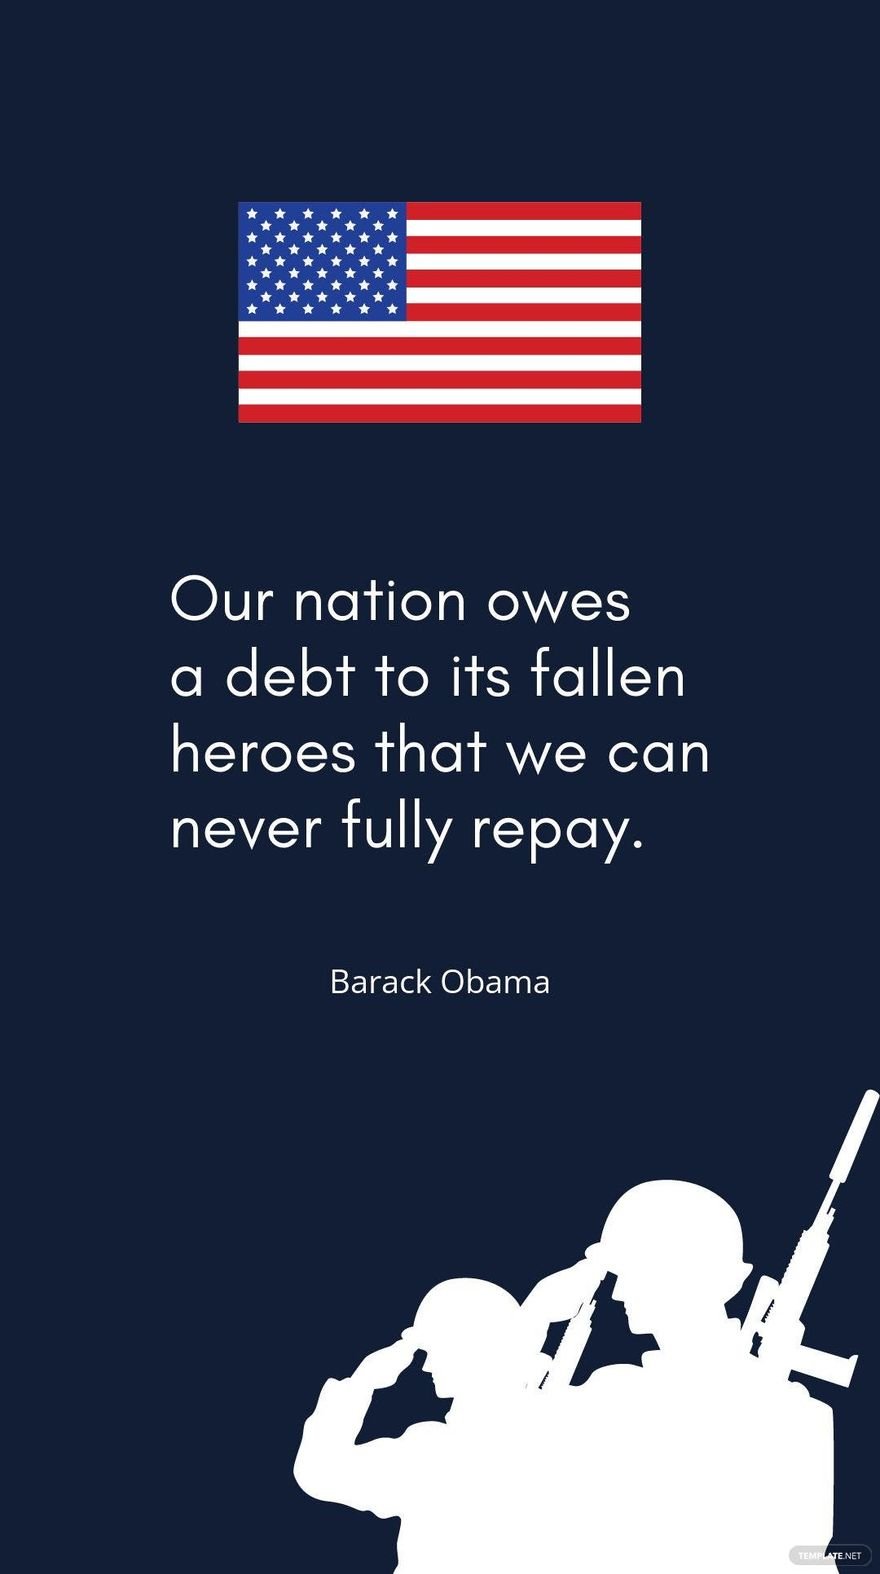 Free Barack Obama - Our nation owes a debt to its fallen heroes that we can never fully repay. in JPG